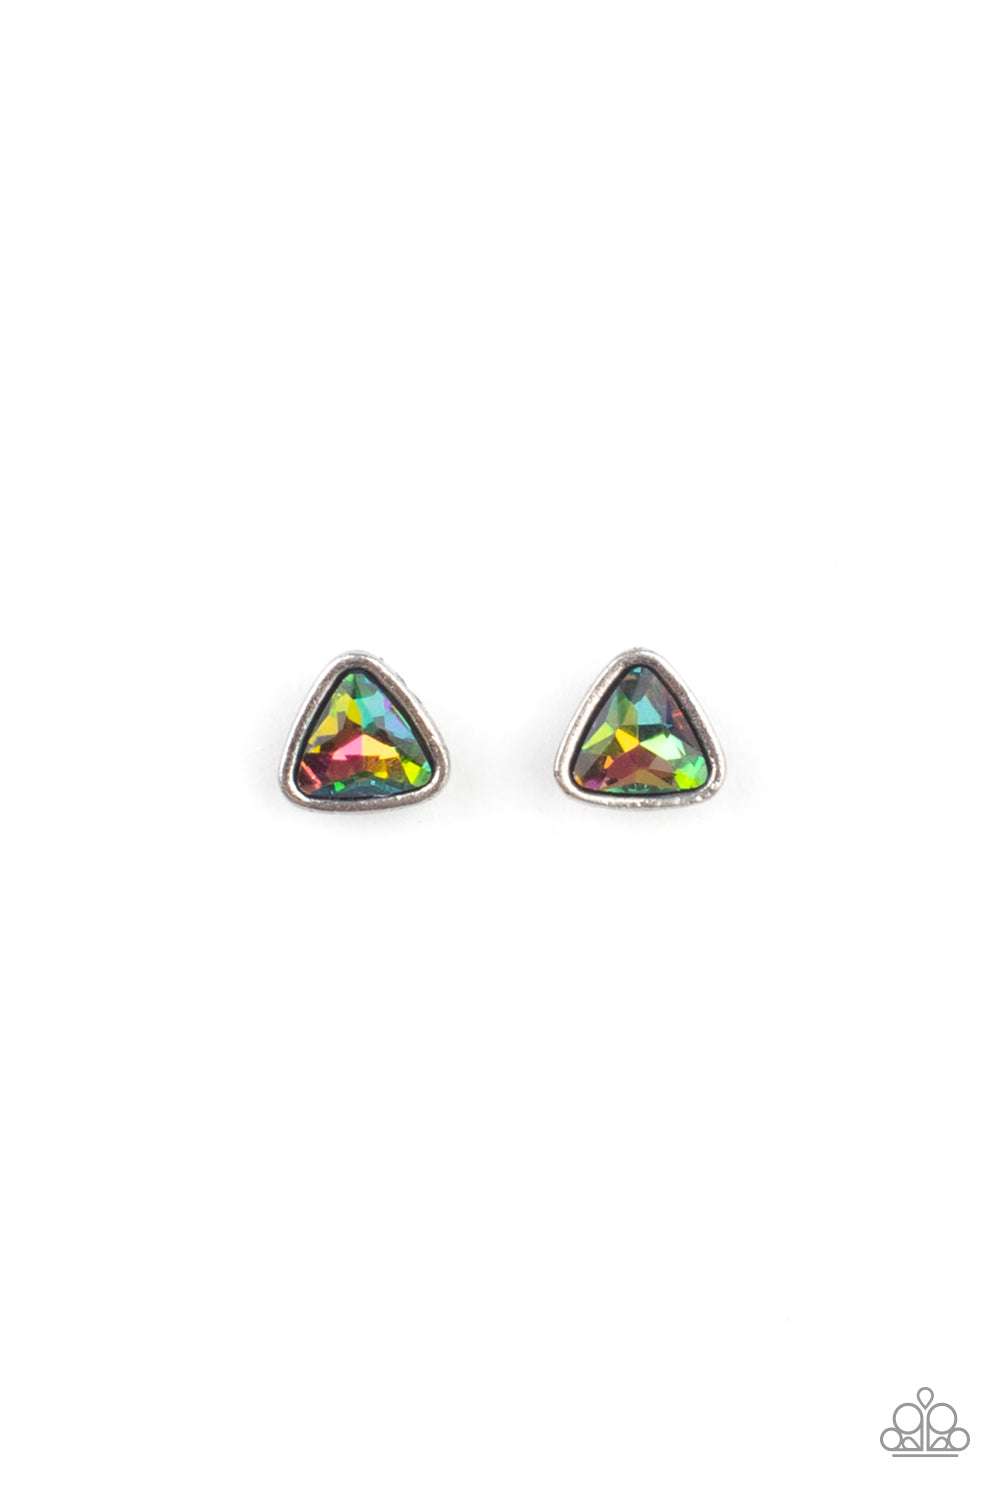 Paparazzi Starlet Shimmer Oil Spill Post Earrings - A Finishing Touch Jewelry